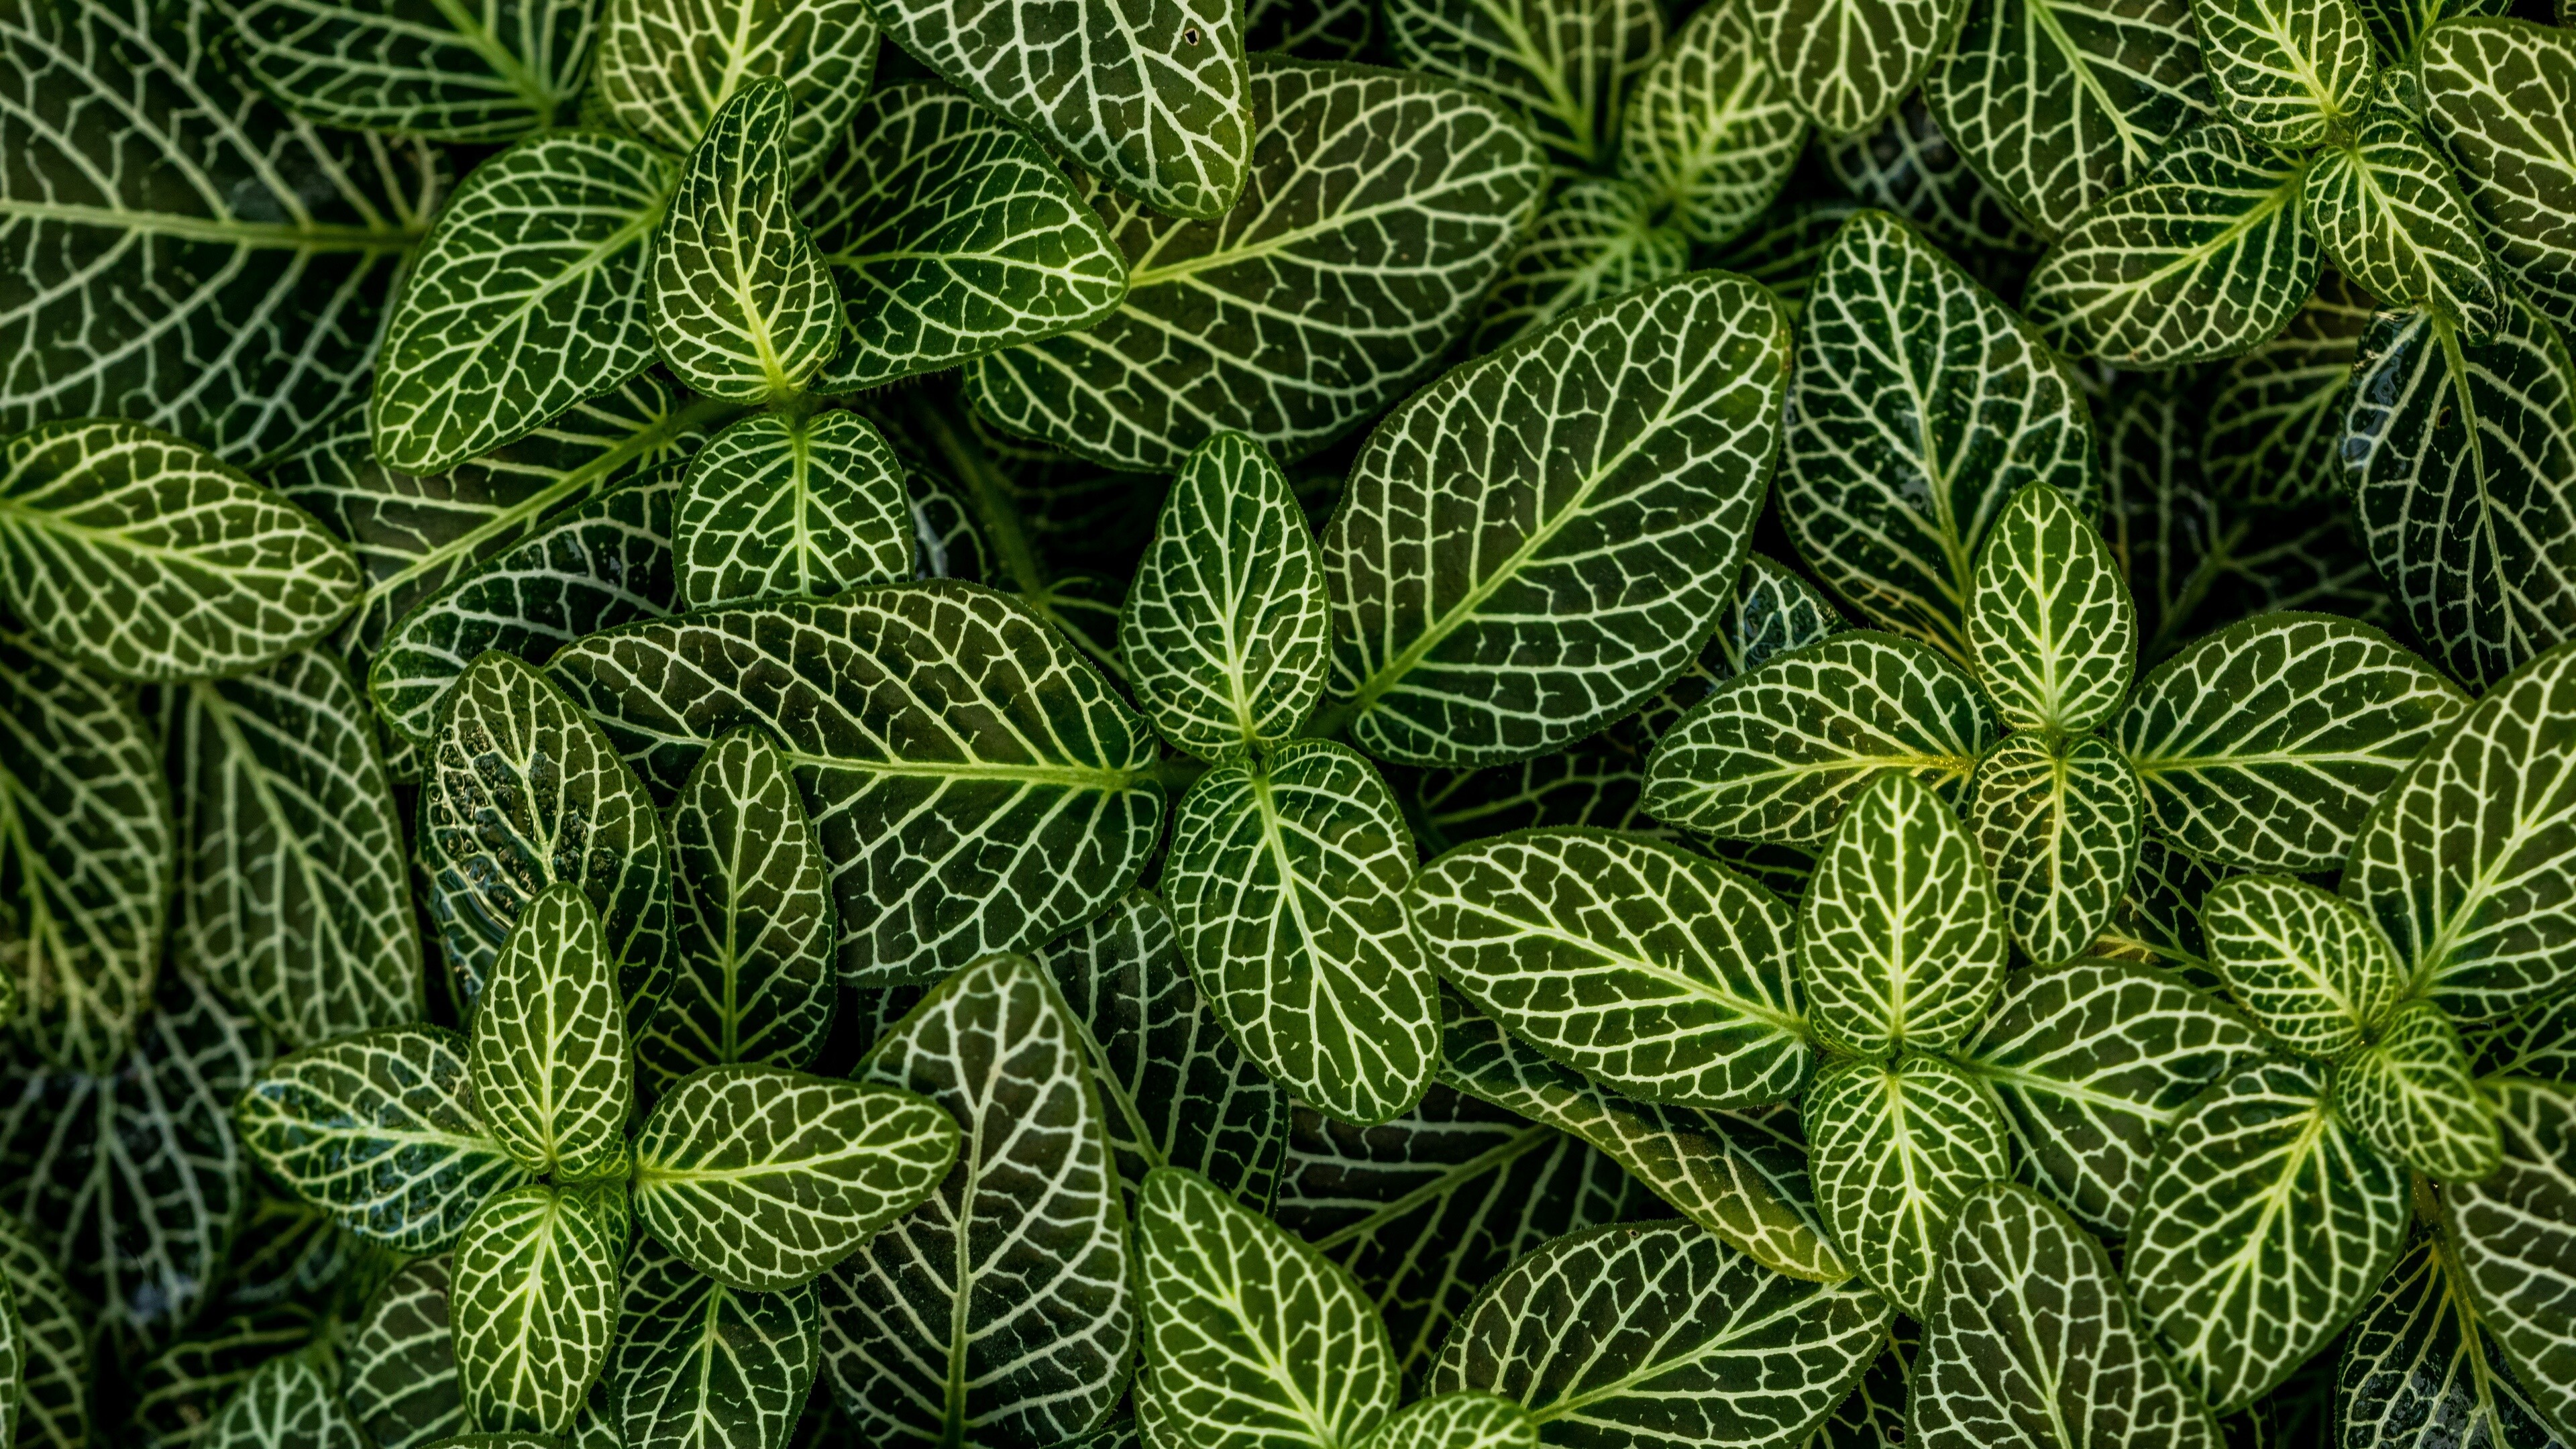 Leaf: Green plants that create their own food by photosynthesis. 3840x2160 4K Wallpaper.